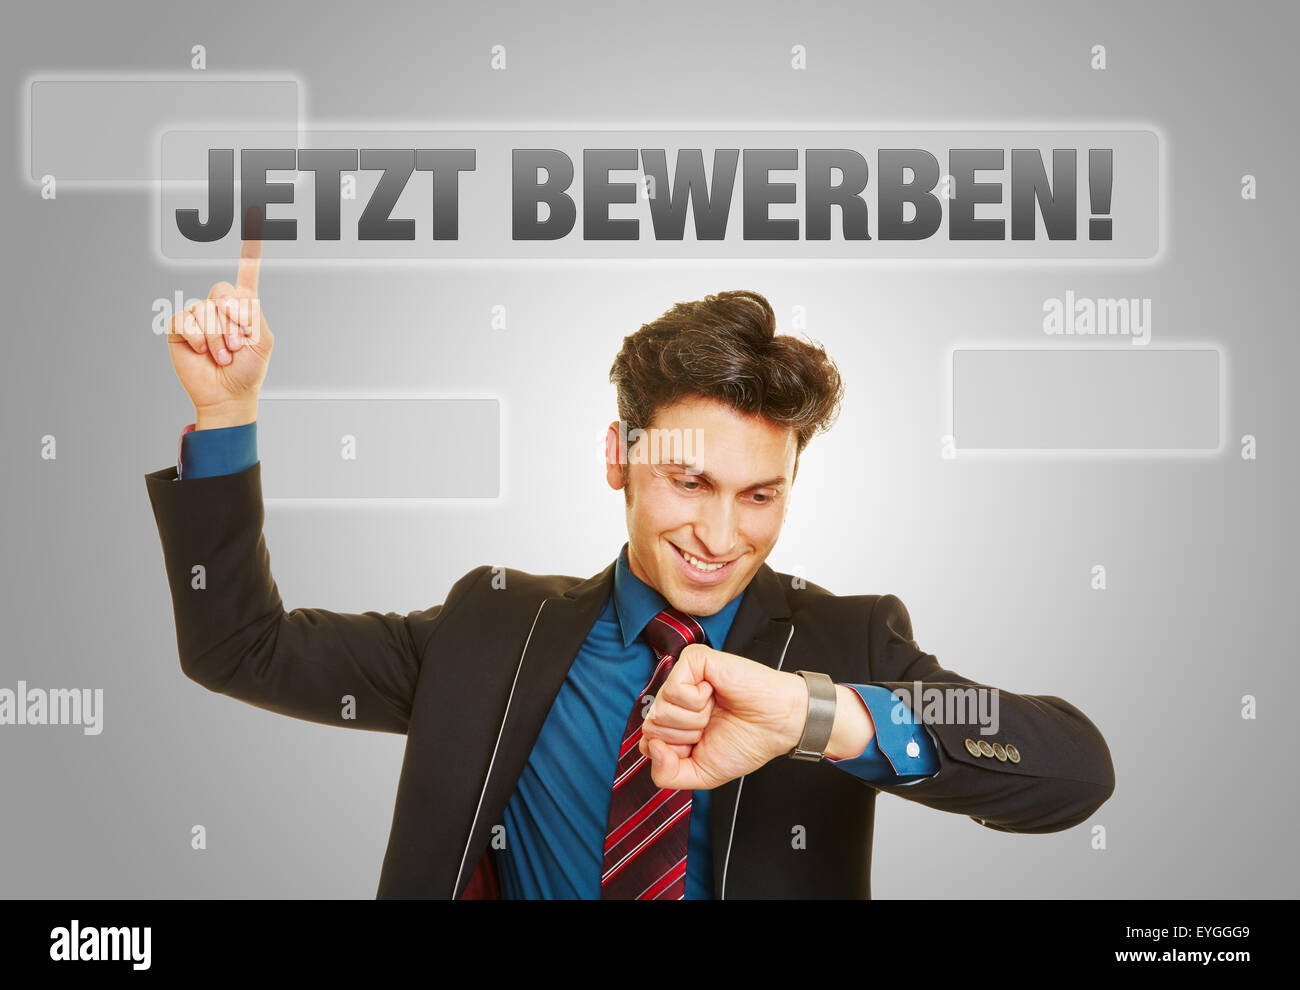 German slogan 'Jetzt bewerben!' (Apply now!) with business man checking his watch Stock Photo